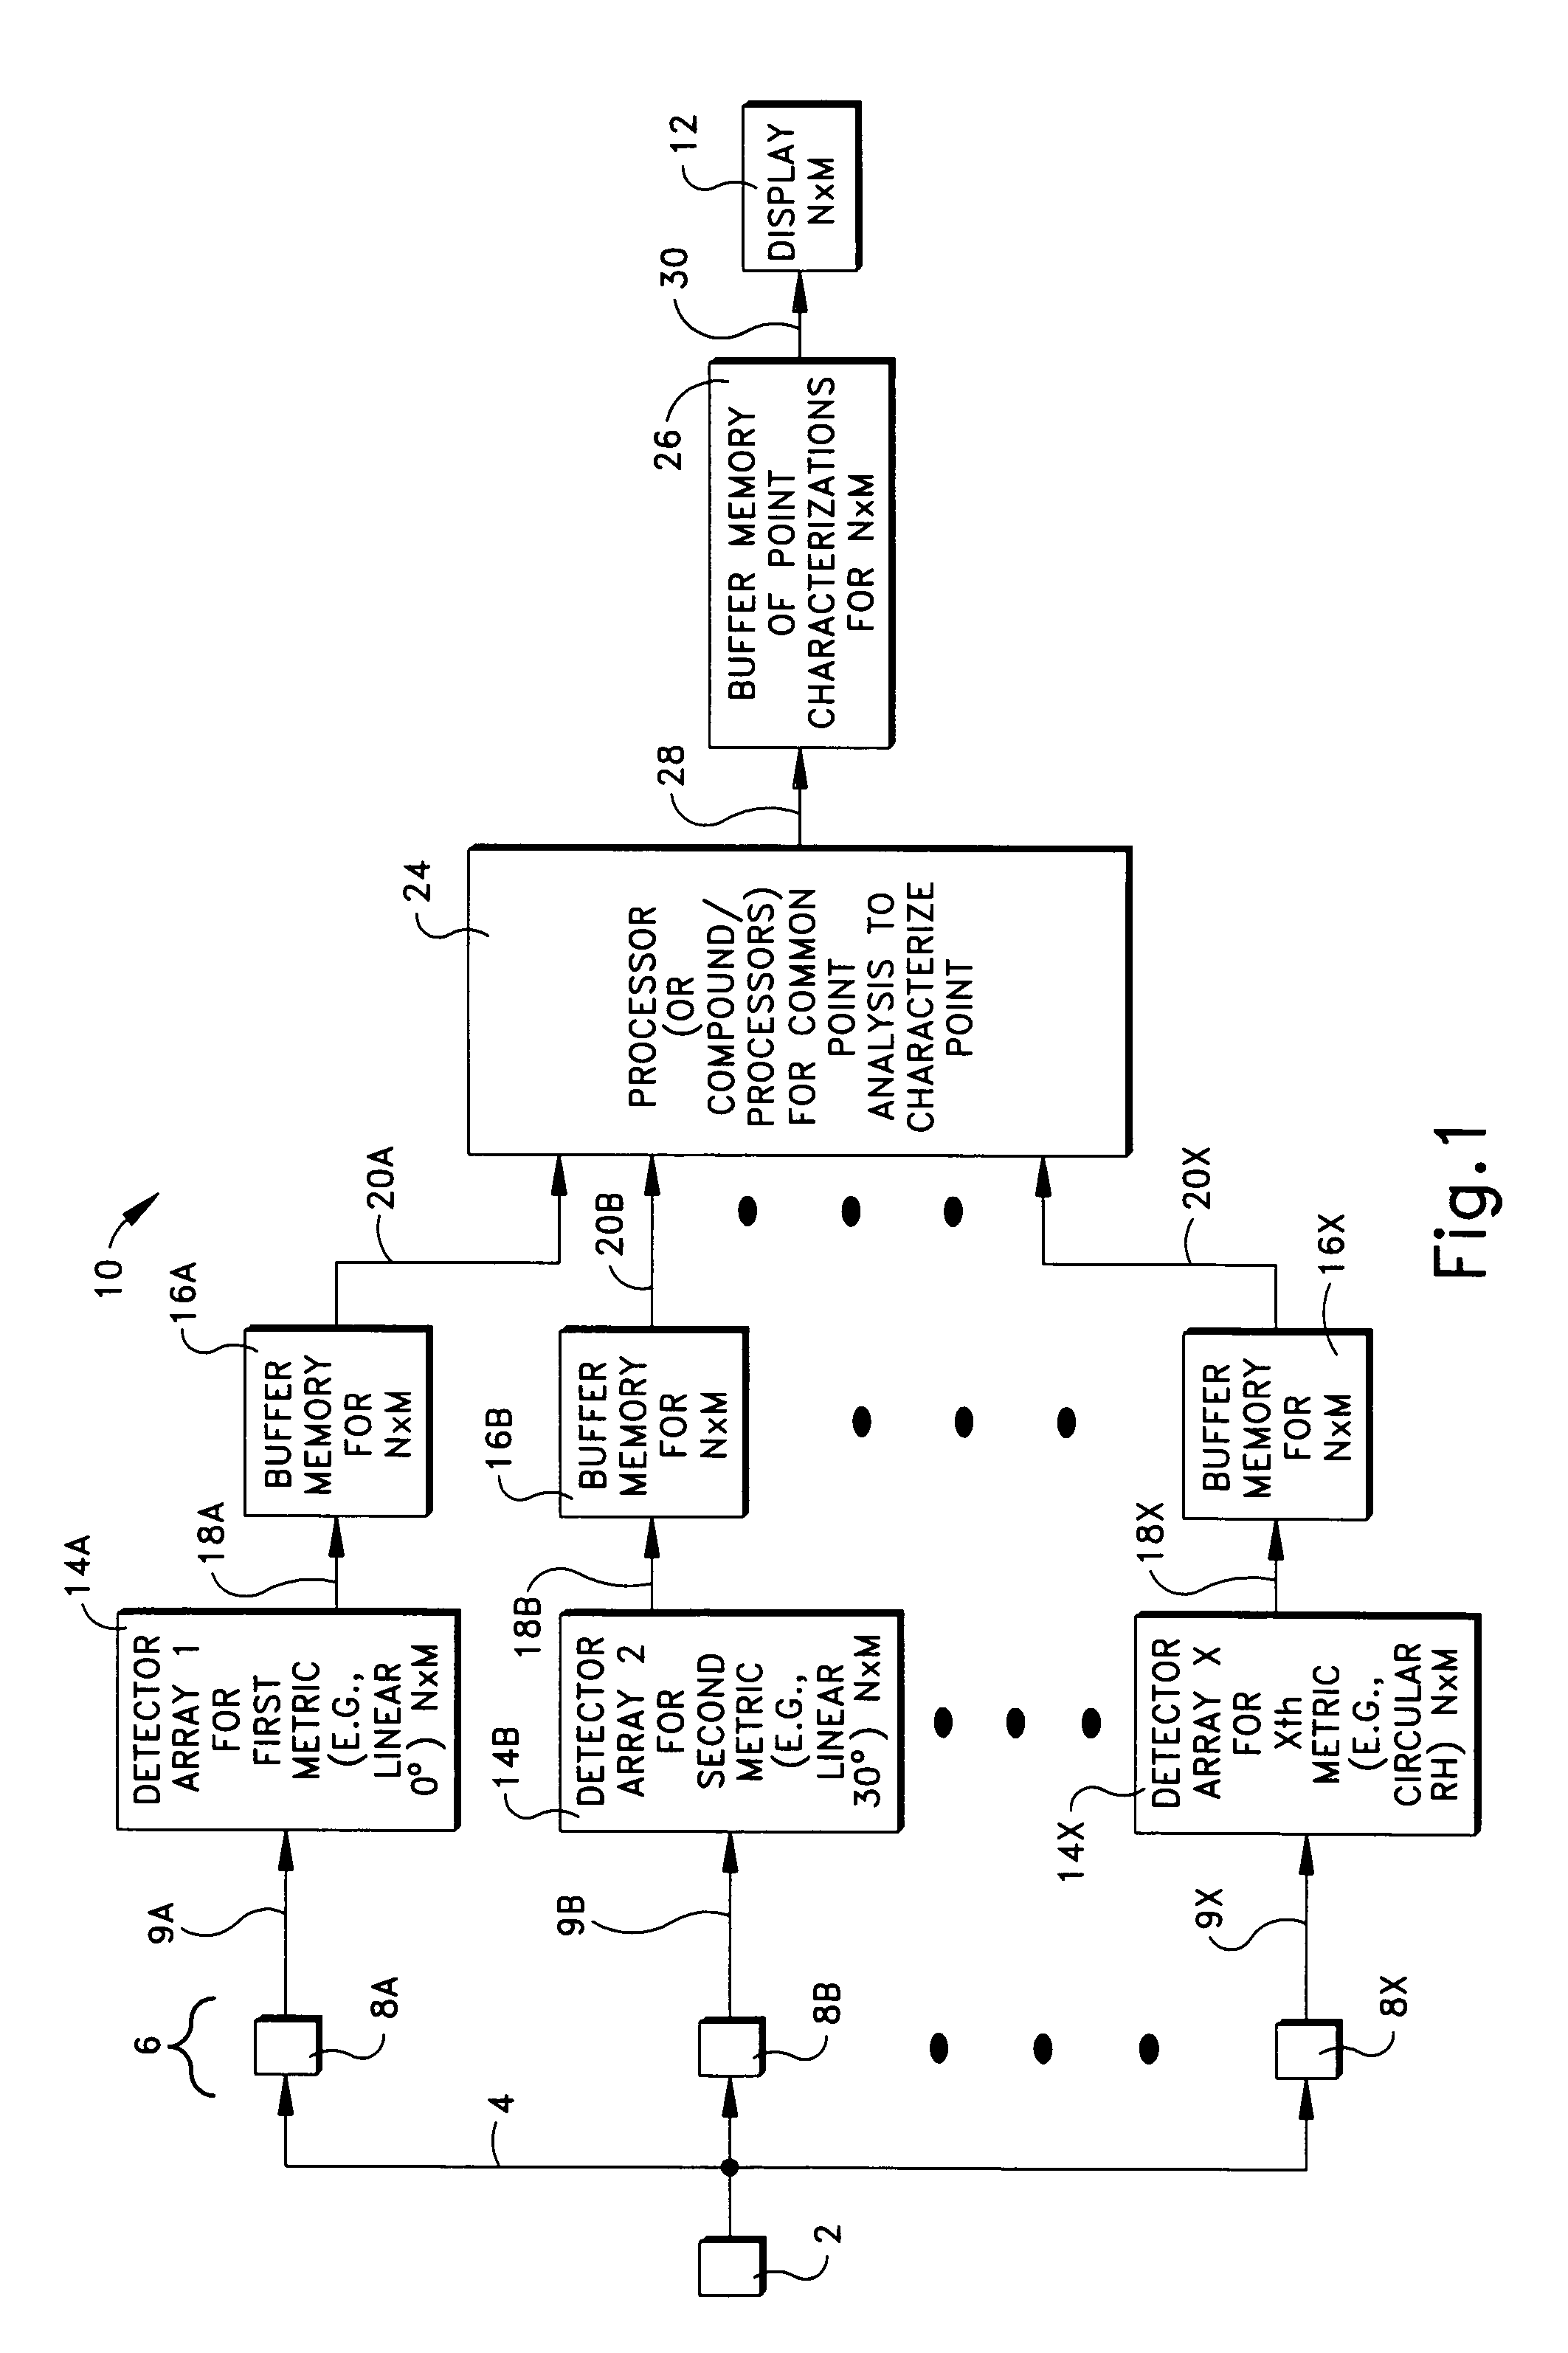 Apparatus and method of information extraction from electromagnetic energy based upon multi-characteristic spatial geometry processing